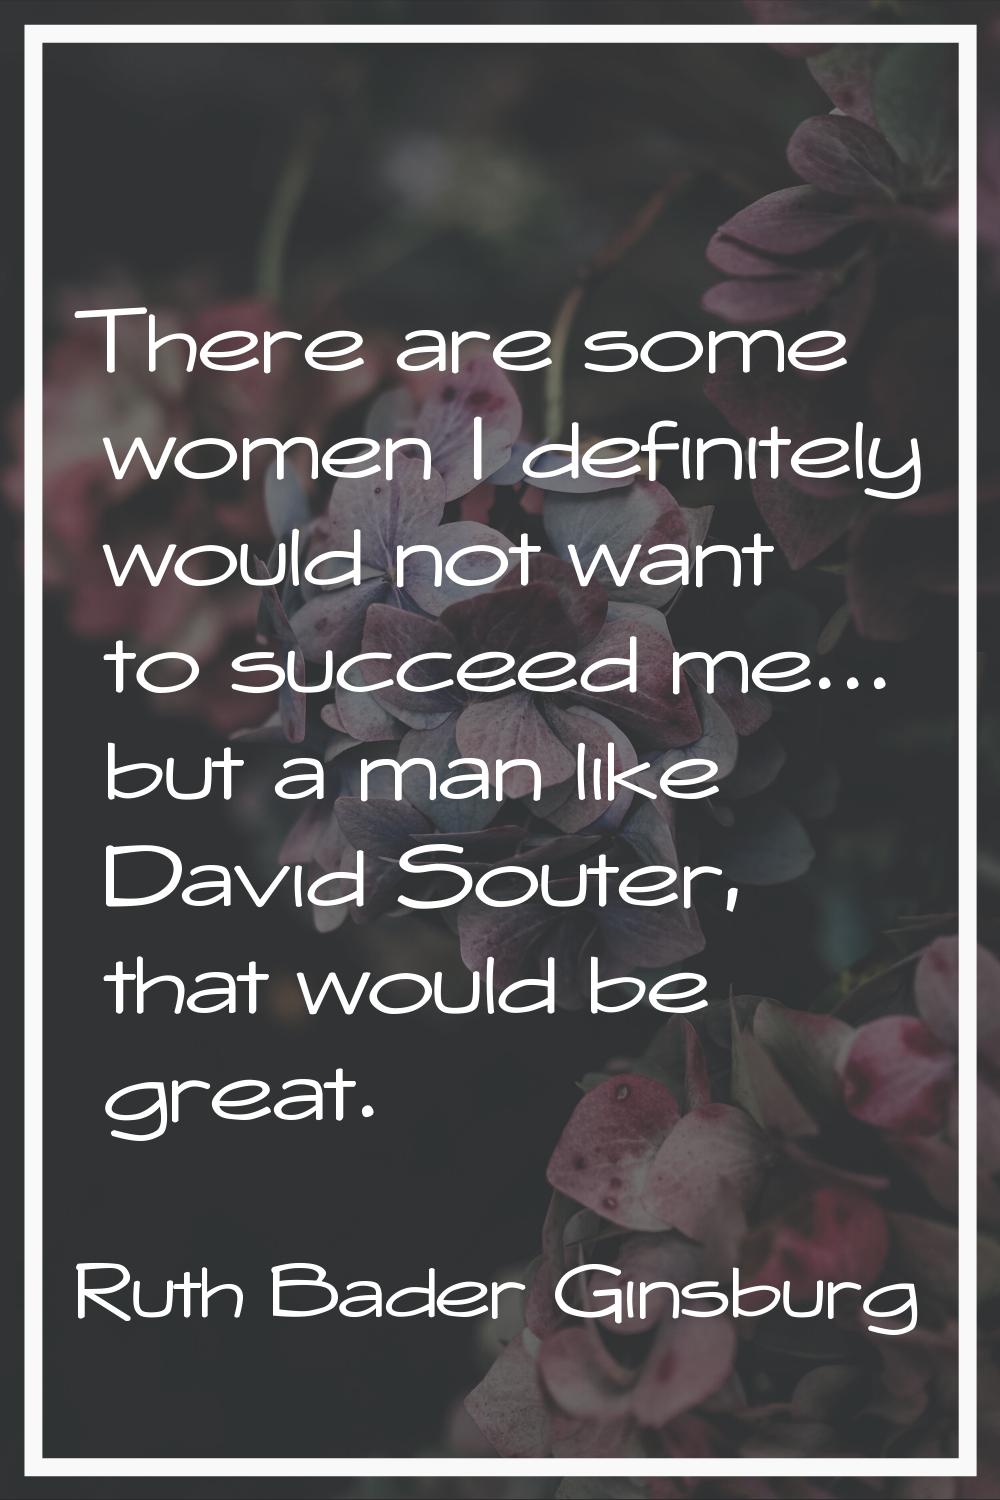 There are some women I definitely would not want to succeed me... but a man like David Souter, that